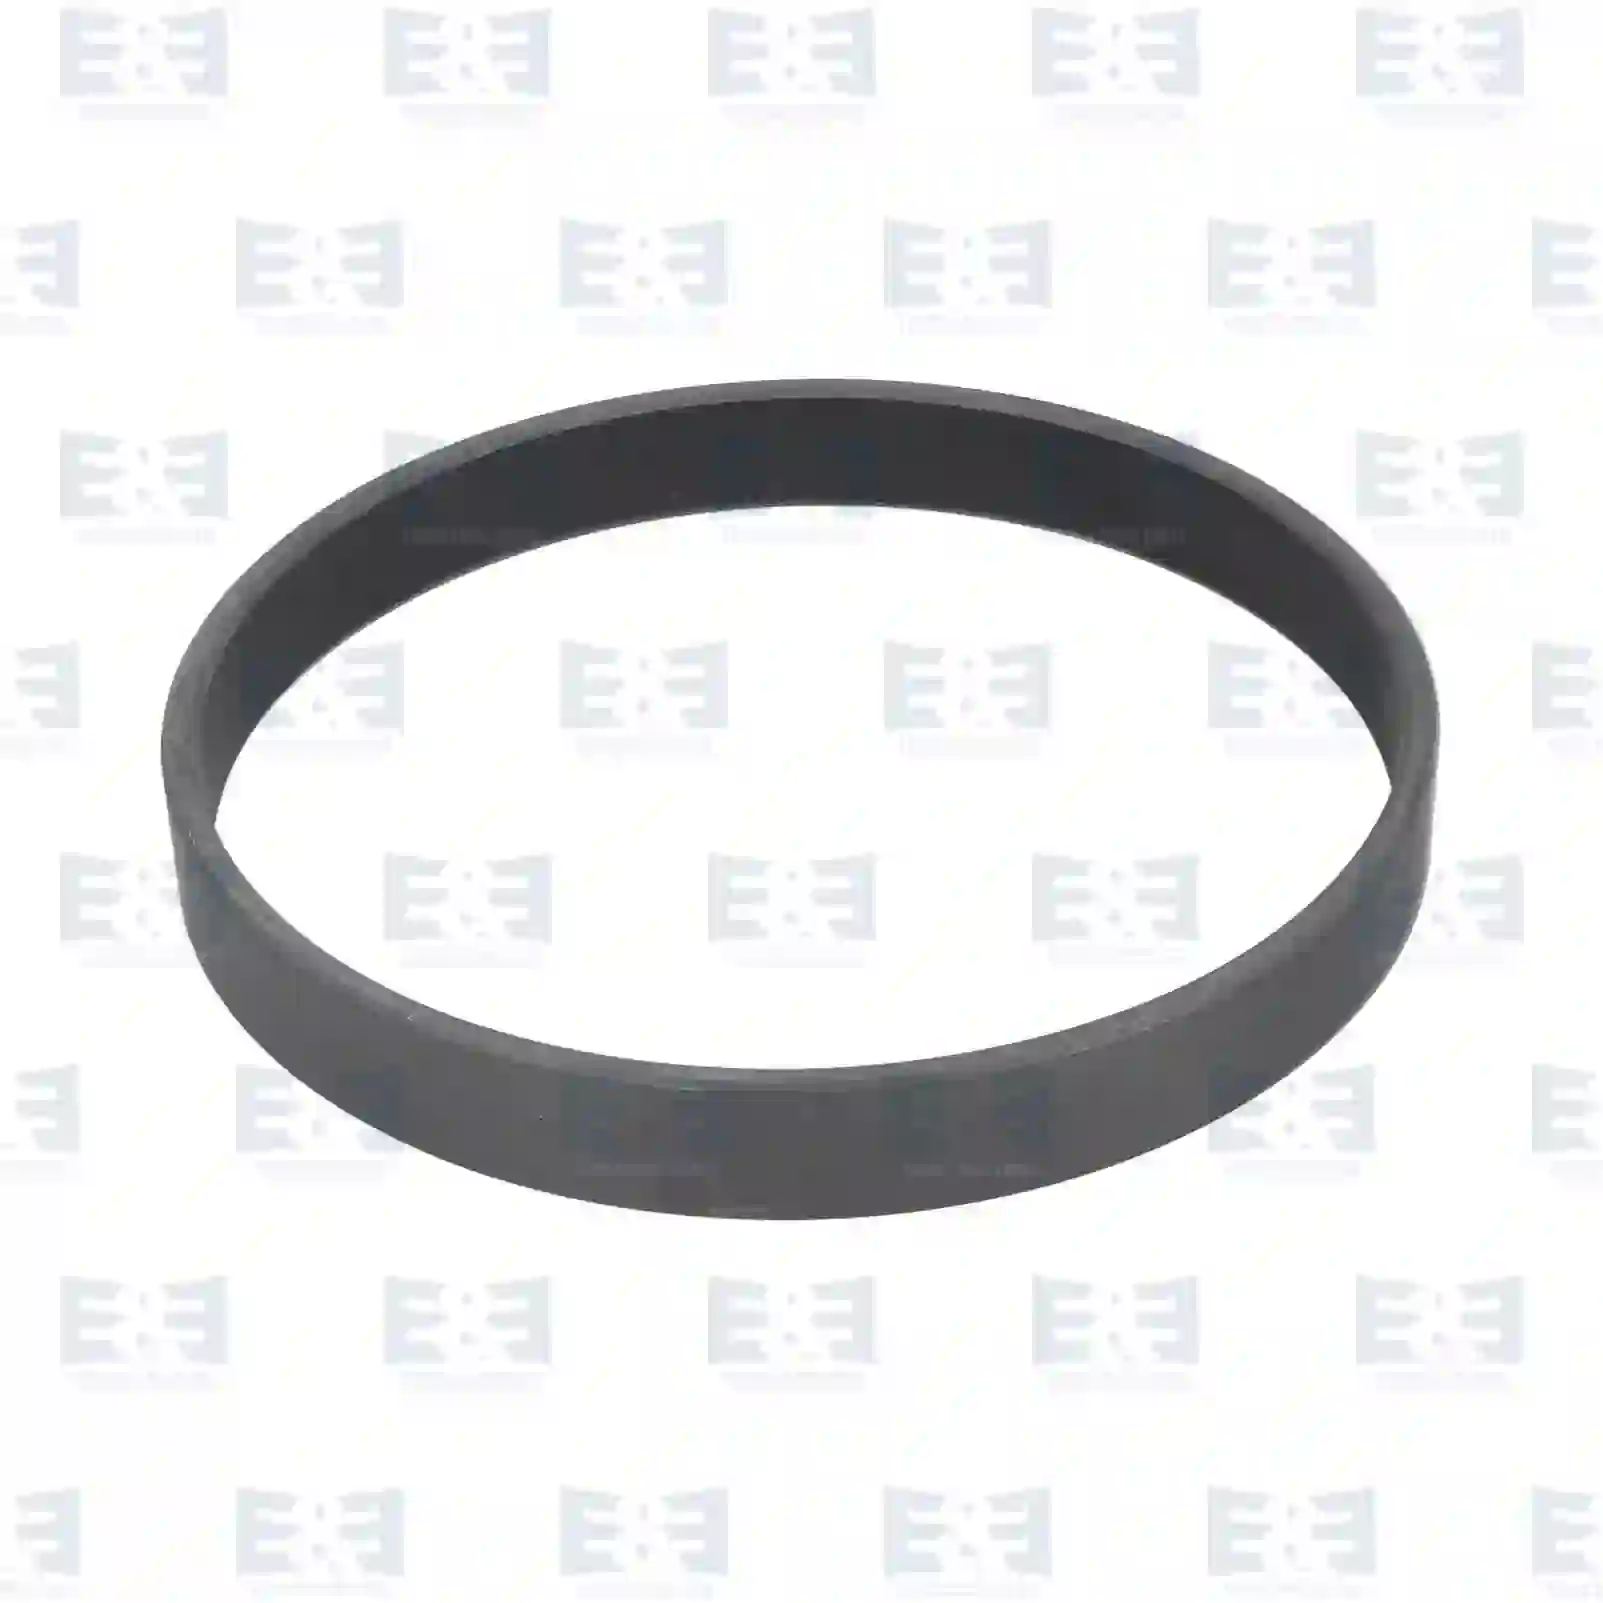  Spacer ring || E&E Truck Spare Parts | Truck Spare Parts, Auotomotive Spare Parts